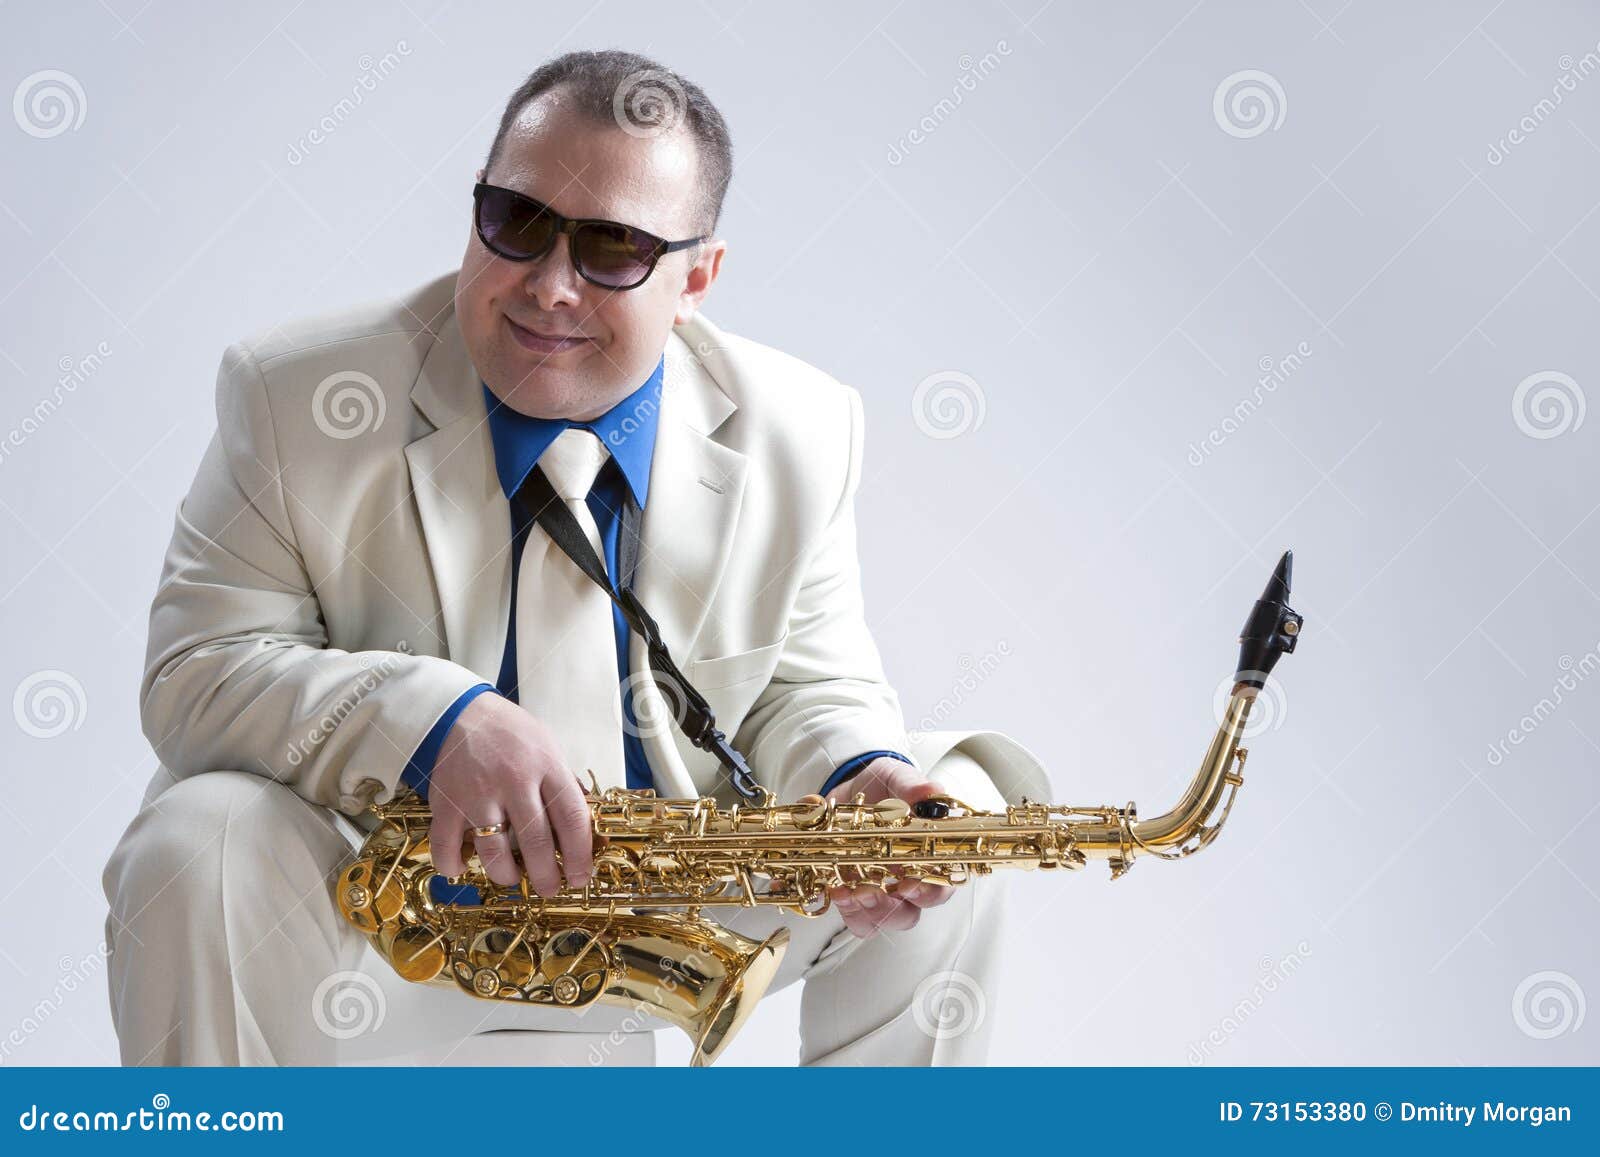 Attractive Woman With Saxophone And Long Legs Posing On 